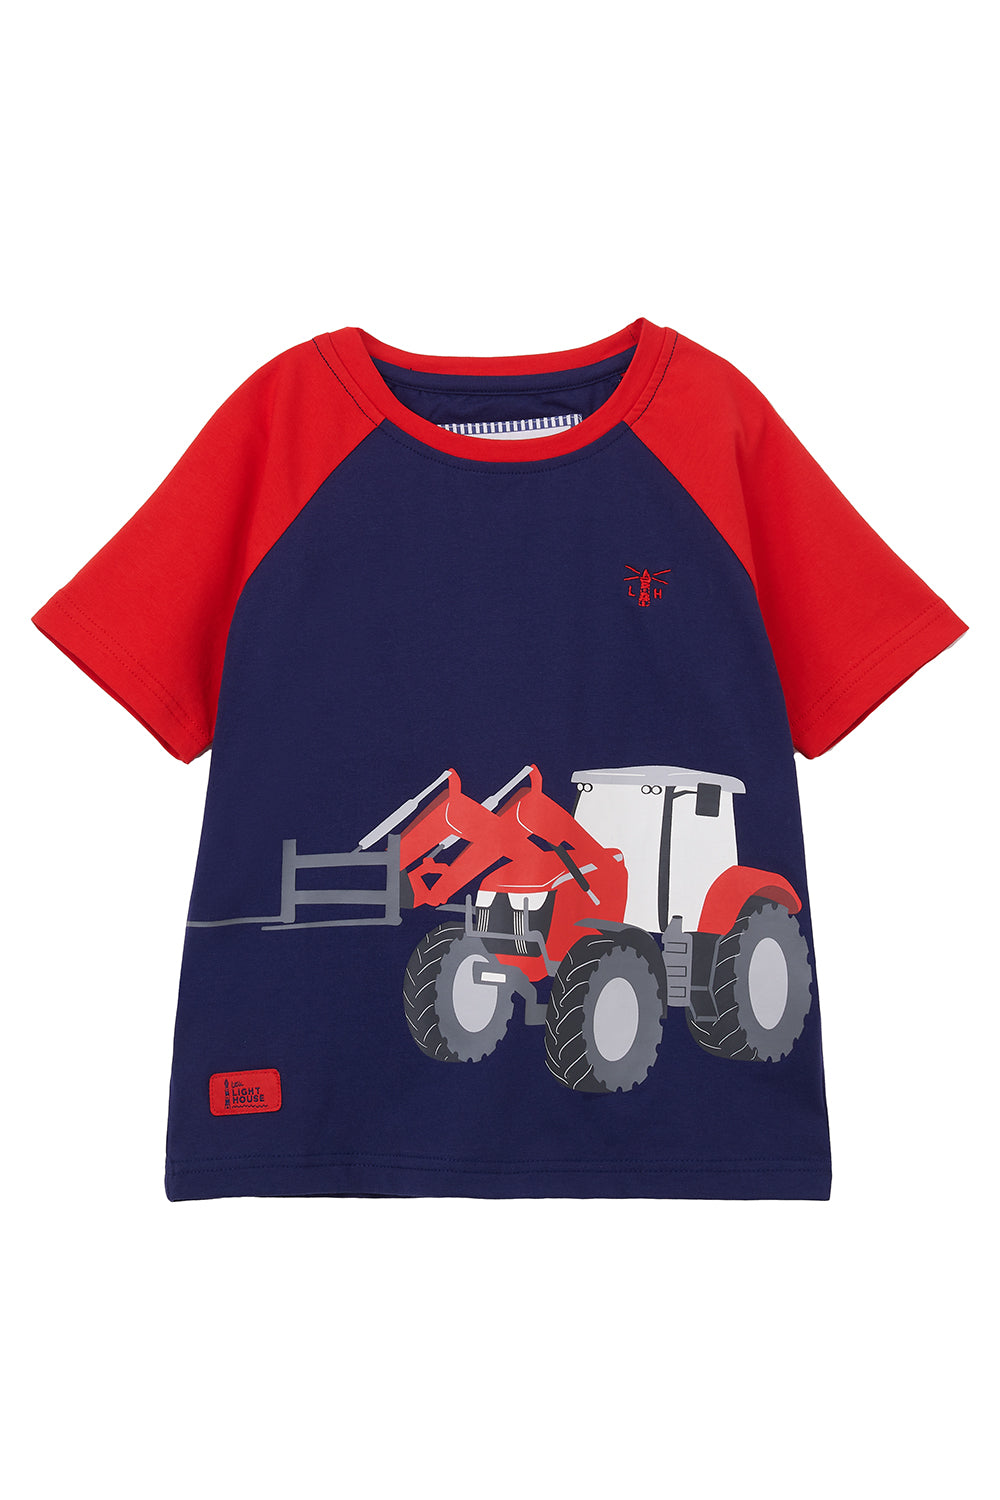 Lighthouse Mason T Shirt - Red Frontloader